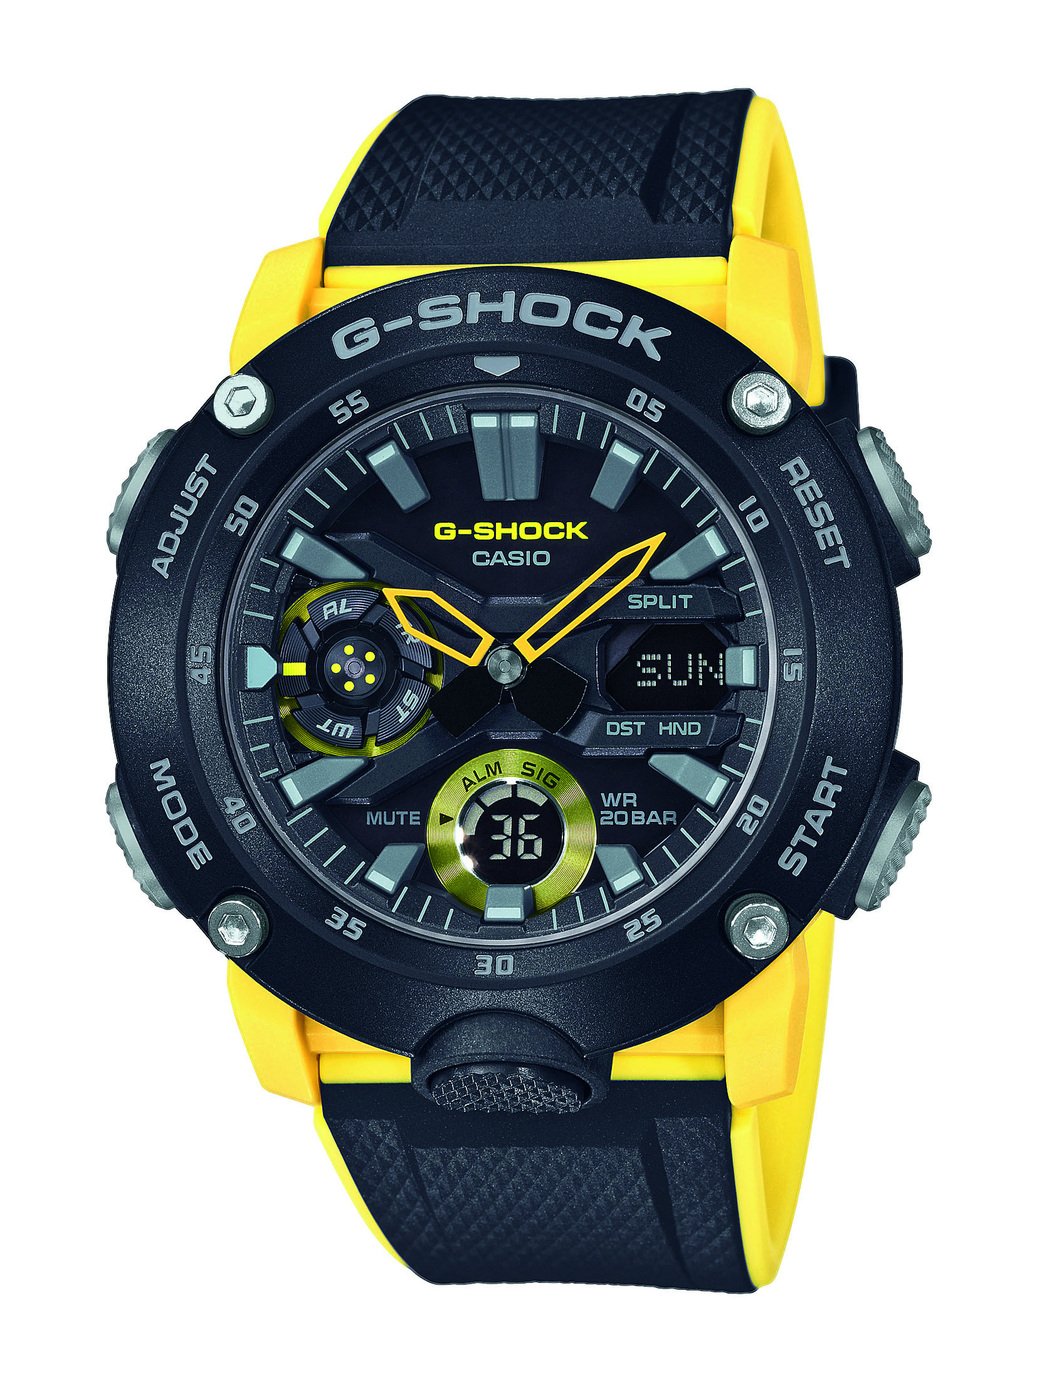 Casio G-Shock Men's Black and Yellow Resin Strap Watch